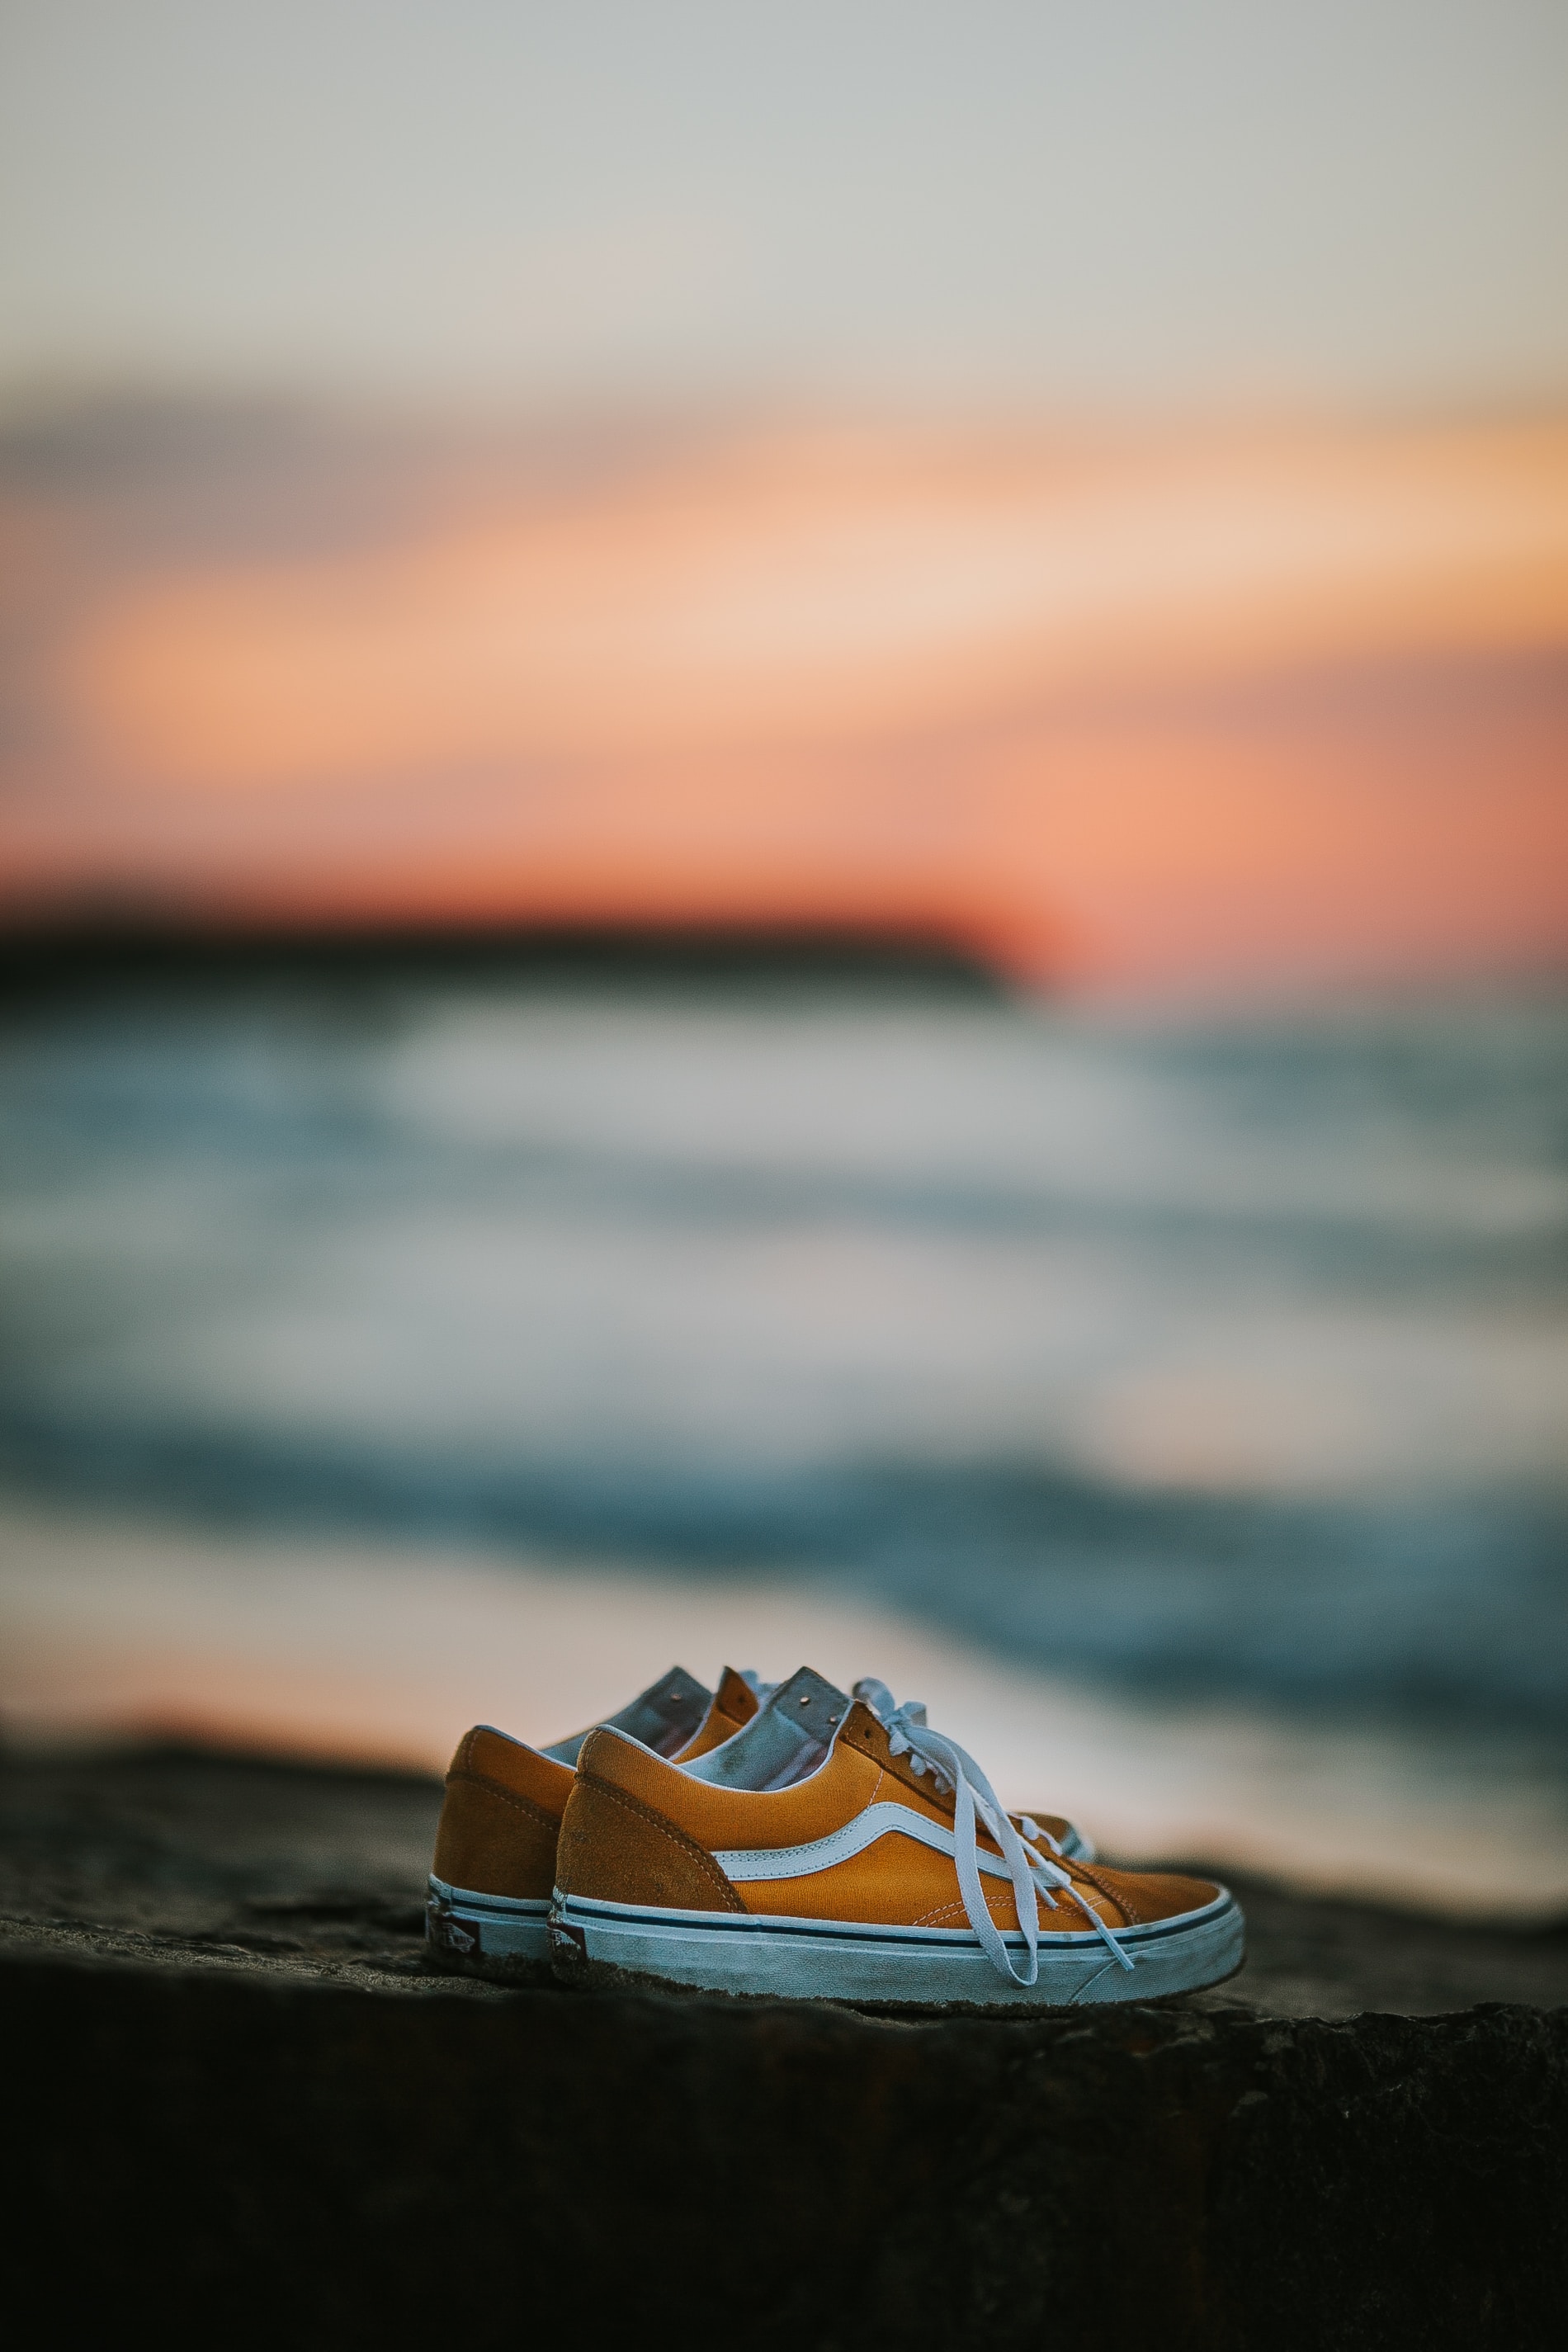 vertical wallpaper shoes, sneakers, fashion, brown, miscellanea, miscellaneous, style, footwear